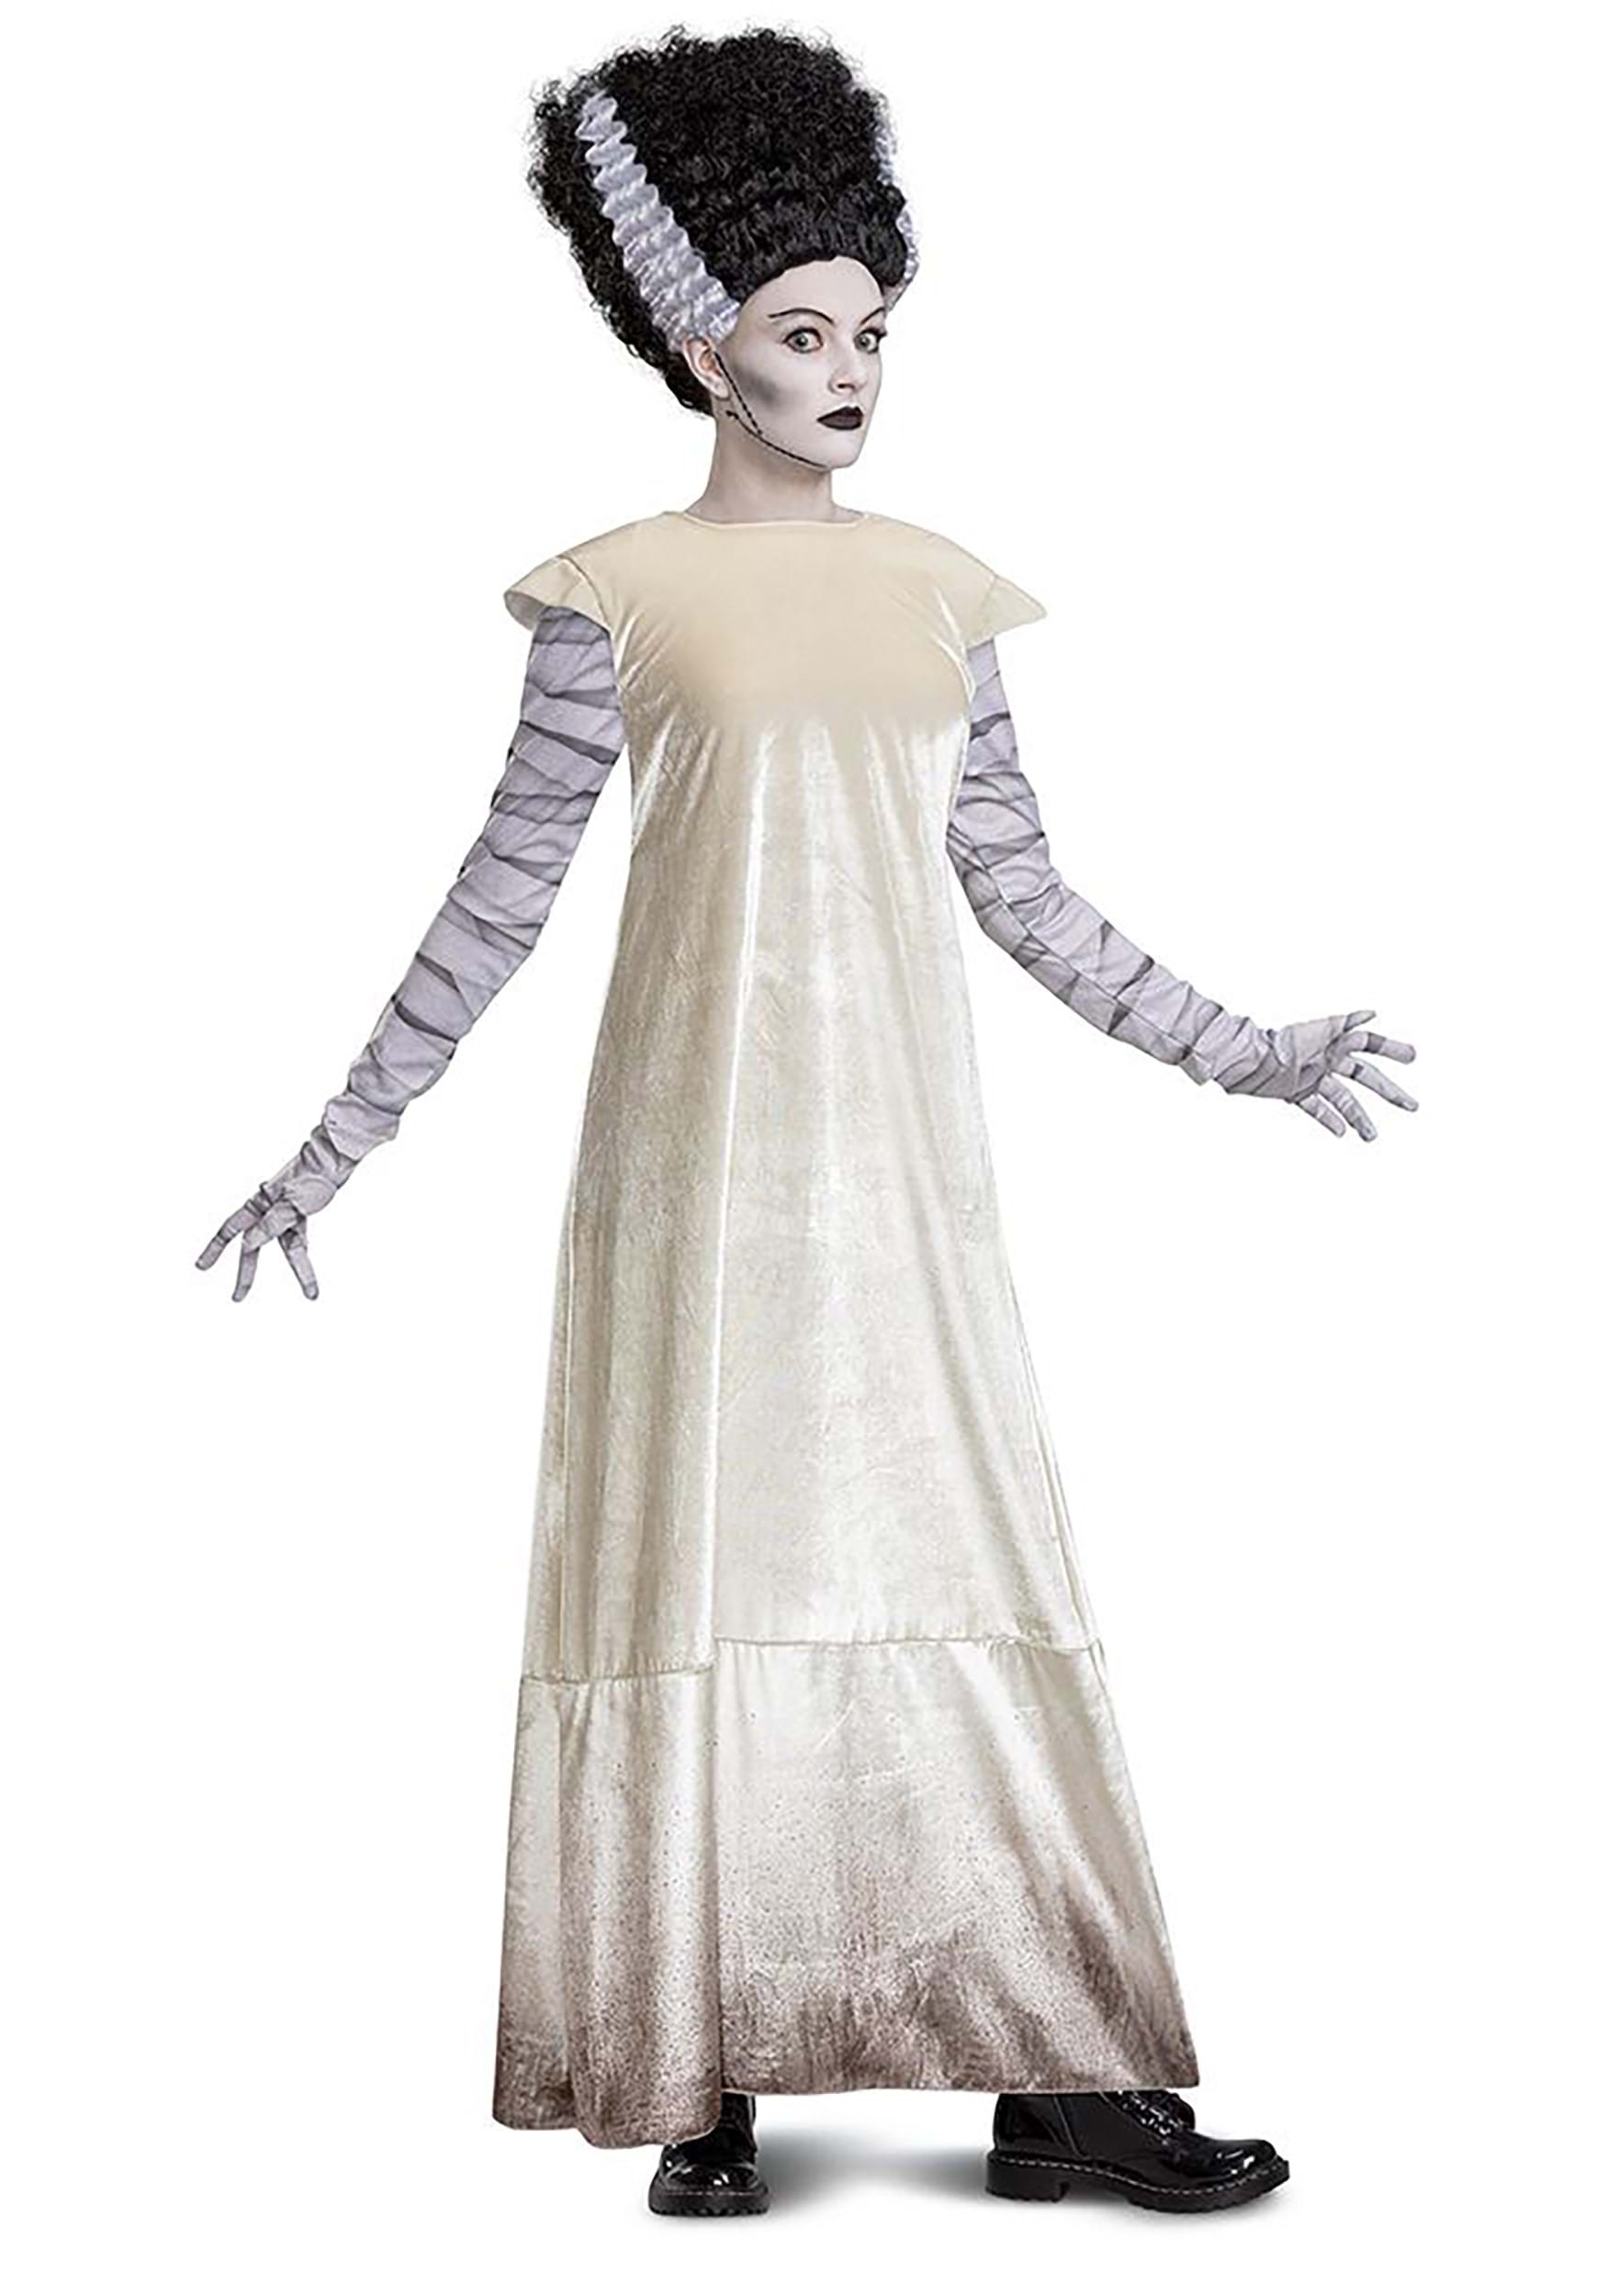 Photos - Fancy Dress Deluxe Disguise Monsters  Bride of Frankenstein Costume for Adults Black 